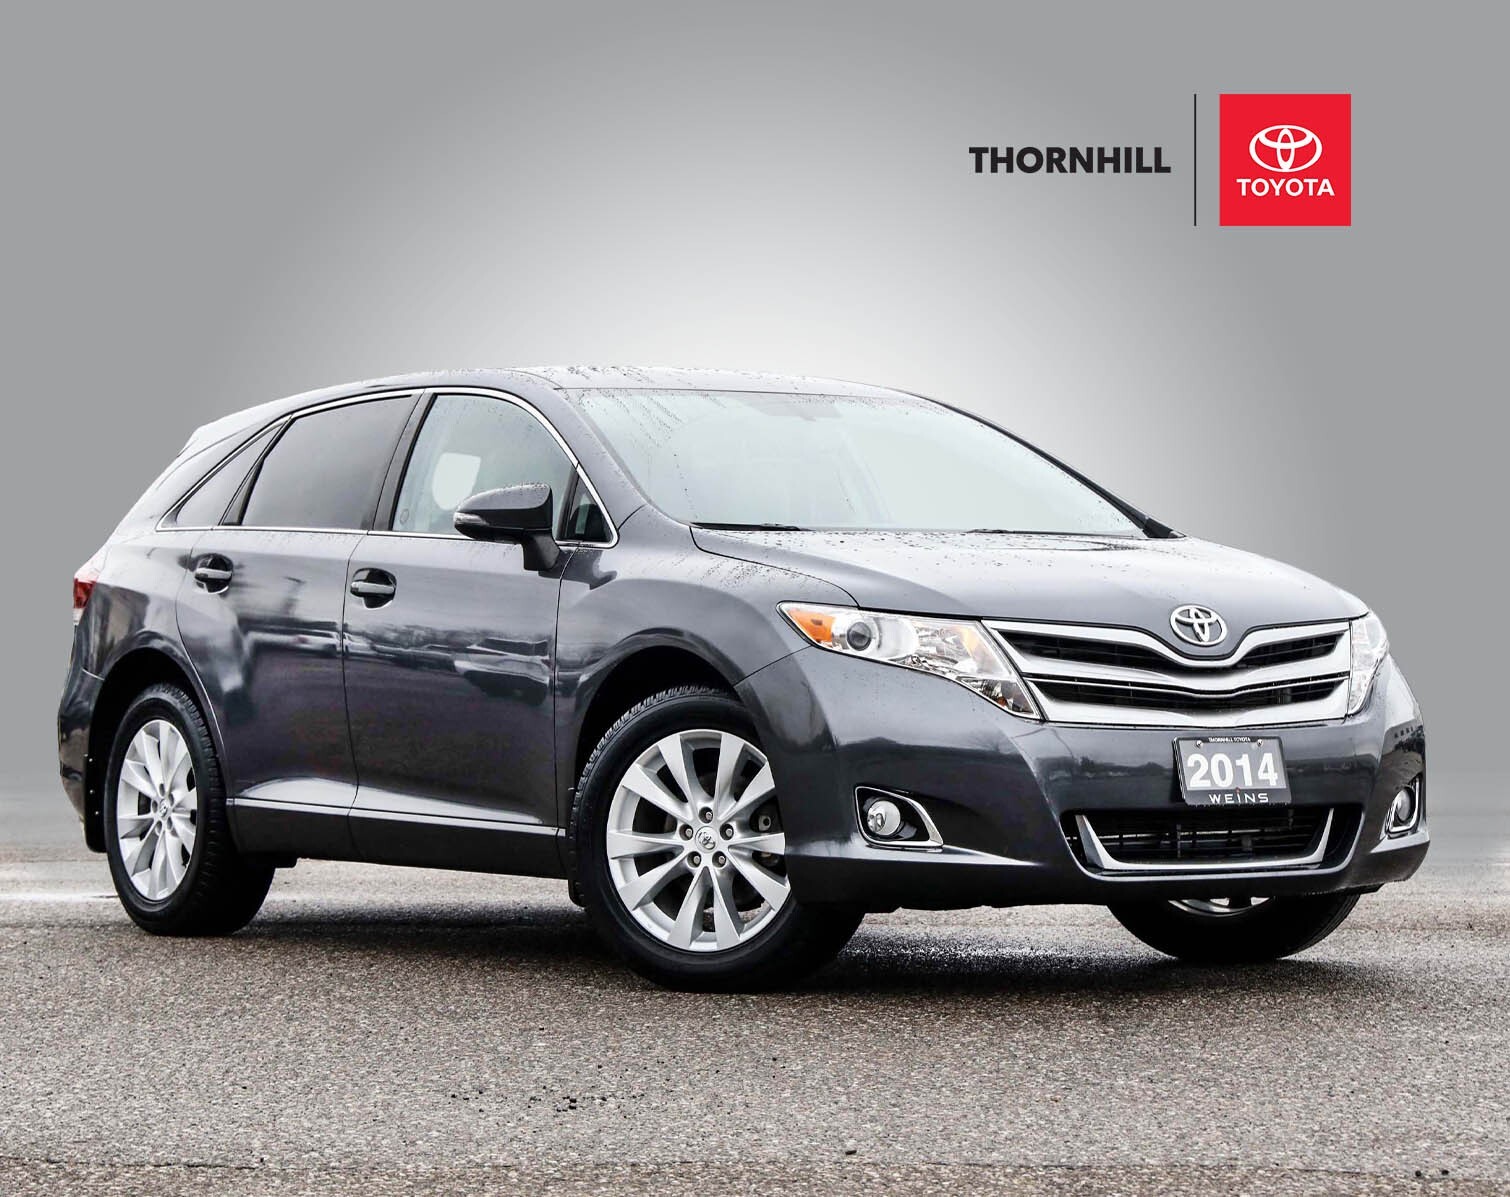 2014 Toyota Venza 19 INCH WHEEL | NEW FRONT ROTORS & BRAKE PADS